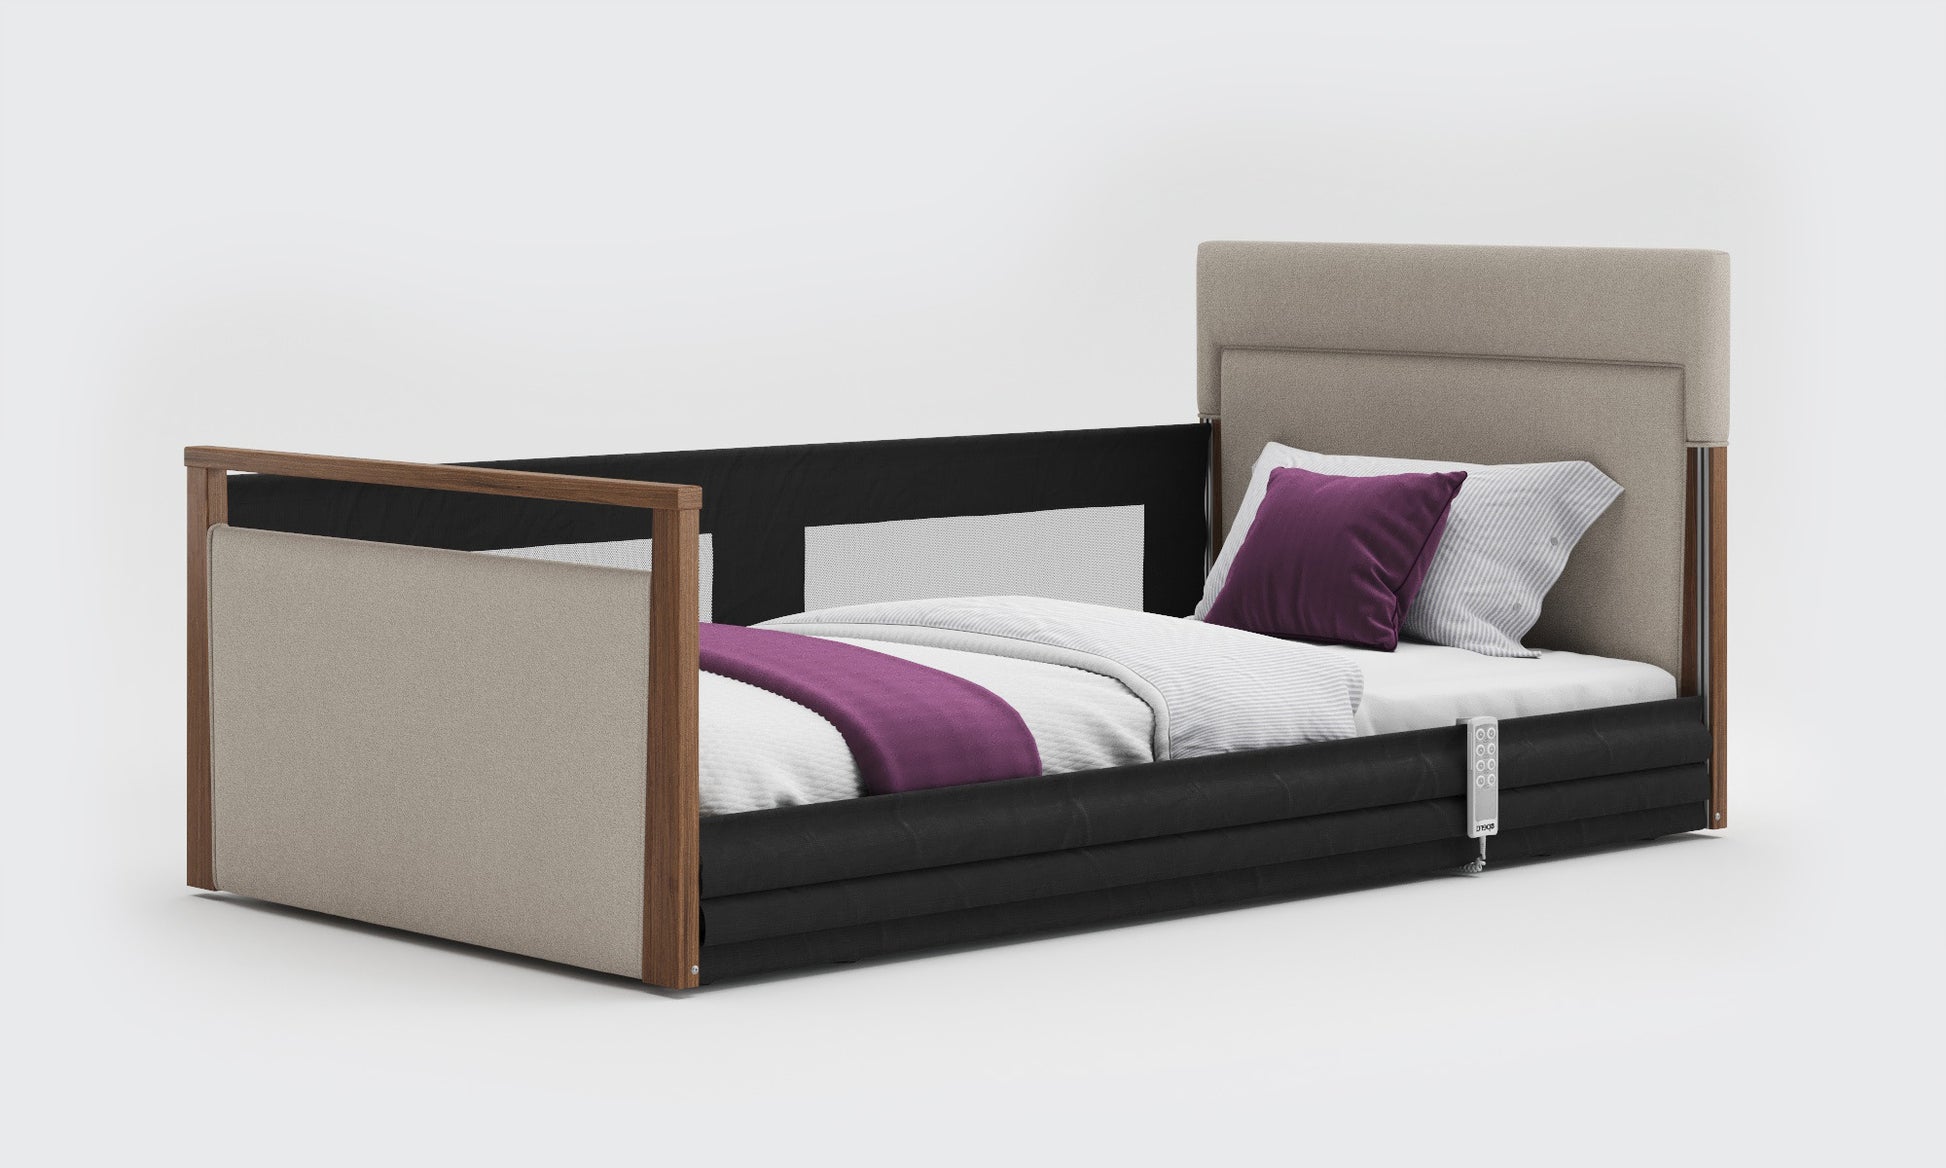 solo safeside 3ft6 upholstered bed in linen and walnut with mesh rails